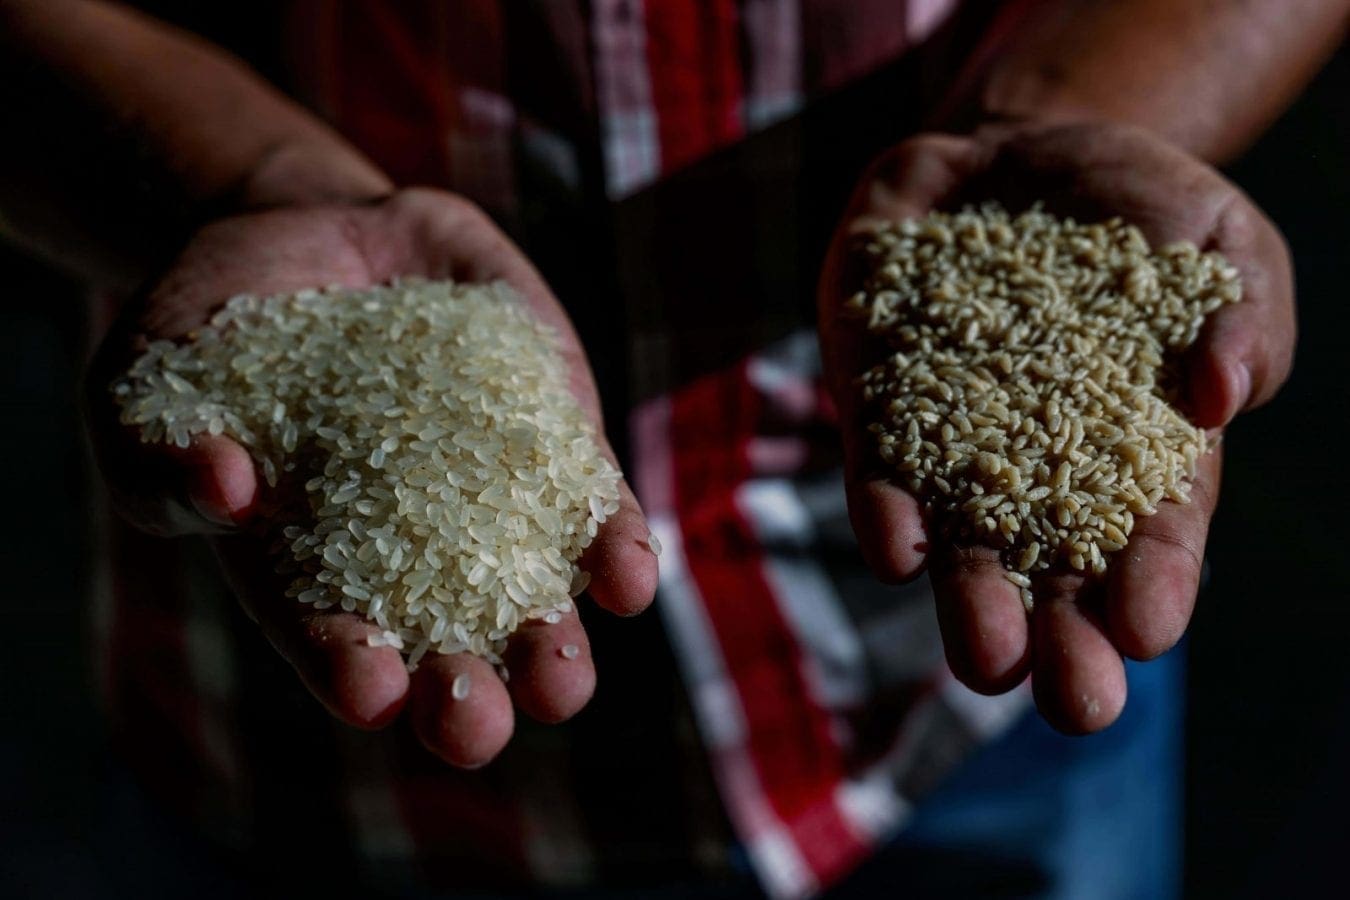 Bangladesh, WFP introduce subsidized fortified rice to curb malnutrition among low-income citizens